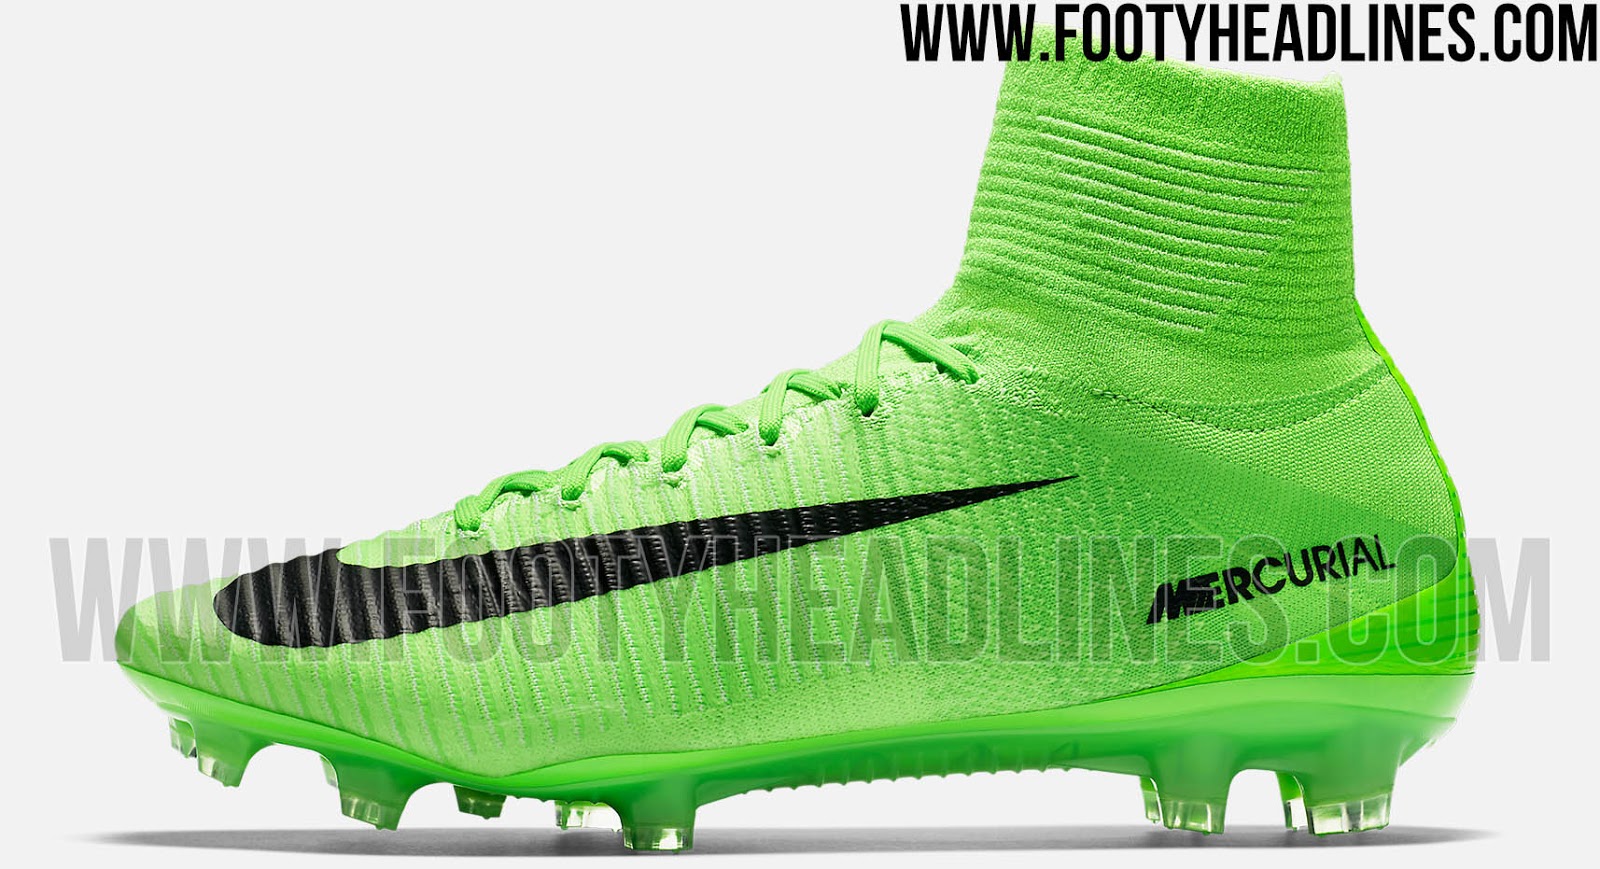 Design: Electric Nike Mercurial Superfly V Radiation Flare 2017 Boots Revealed - Footy Headlines